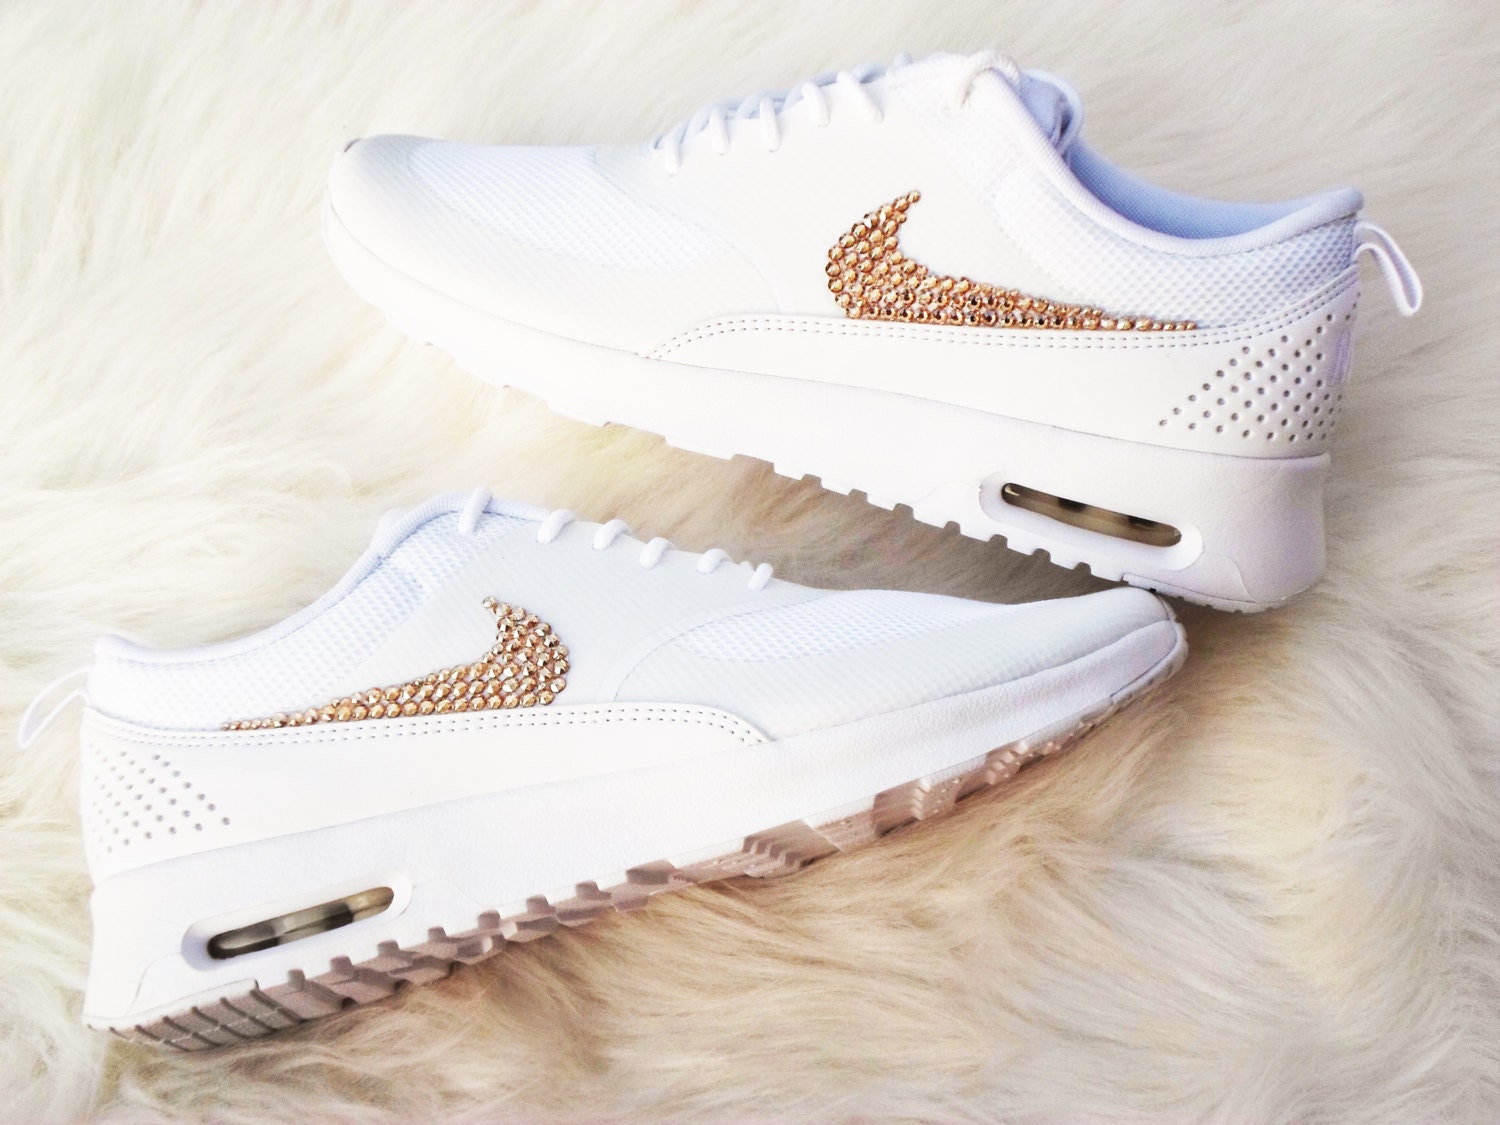 White And Rose Gold Sneakers / Nike Air Max 90 Rose Gold Sneakers Made